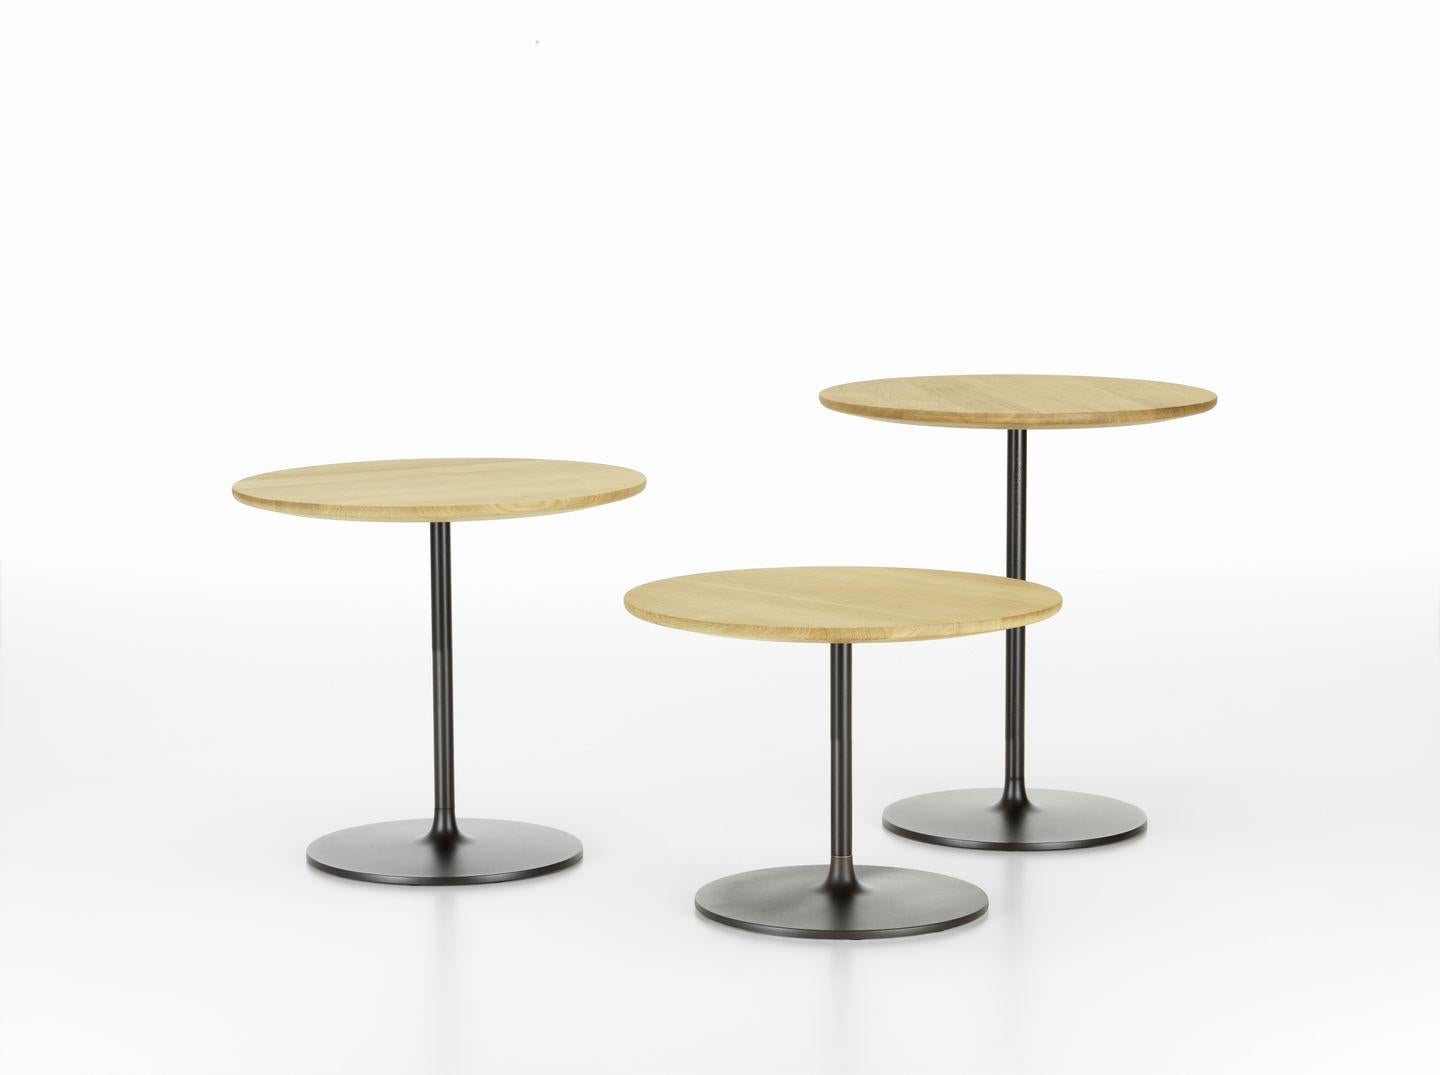 Contemporary Jasper Morrison Occasional Low Table, Wood and Metal by Vitra